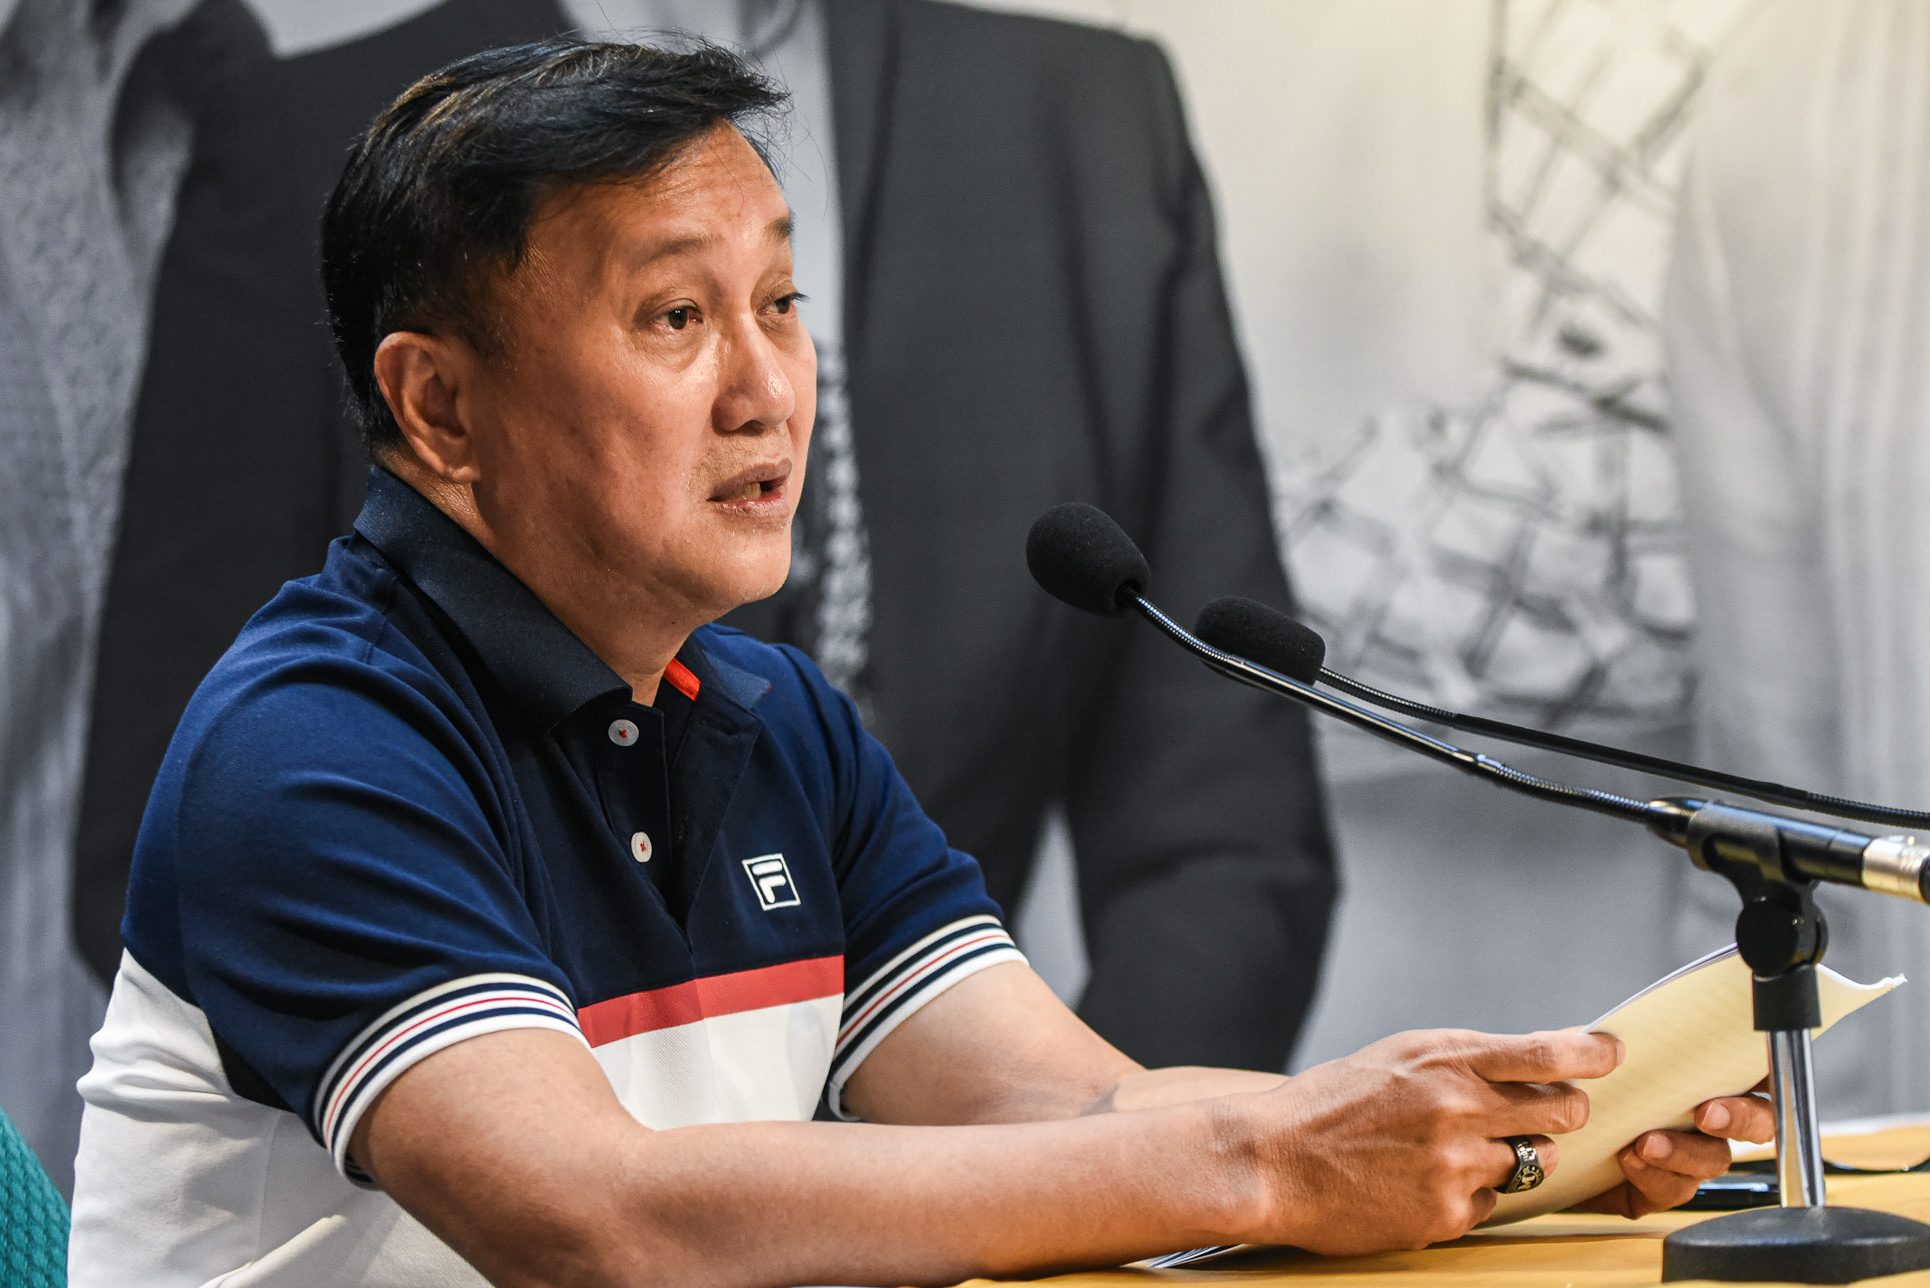 Who will replace Tolentino as Senate blue ribbon chair?